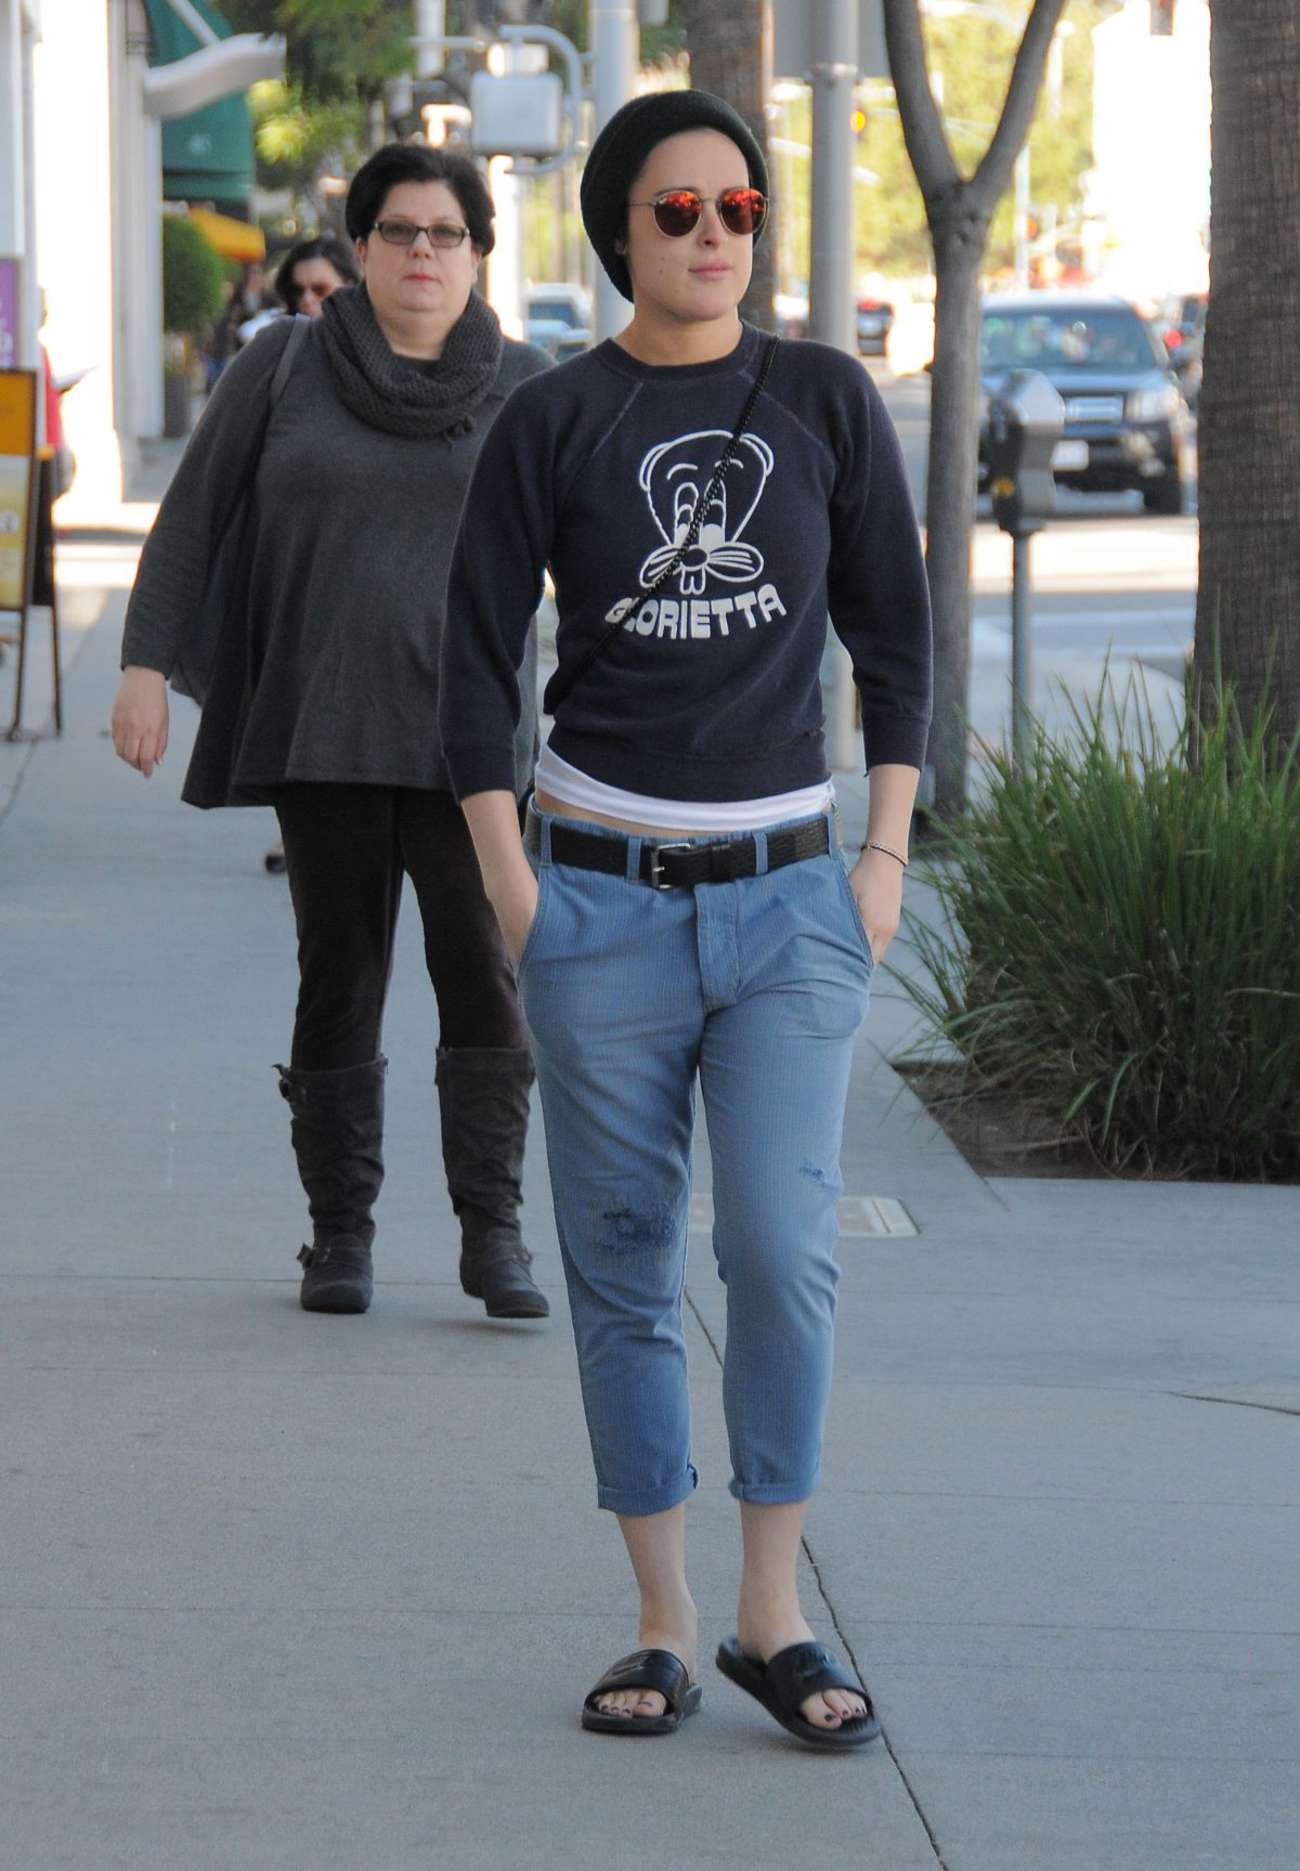 Rumer Willis Out in Beverly Hills